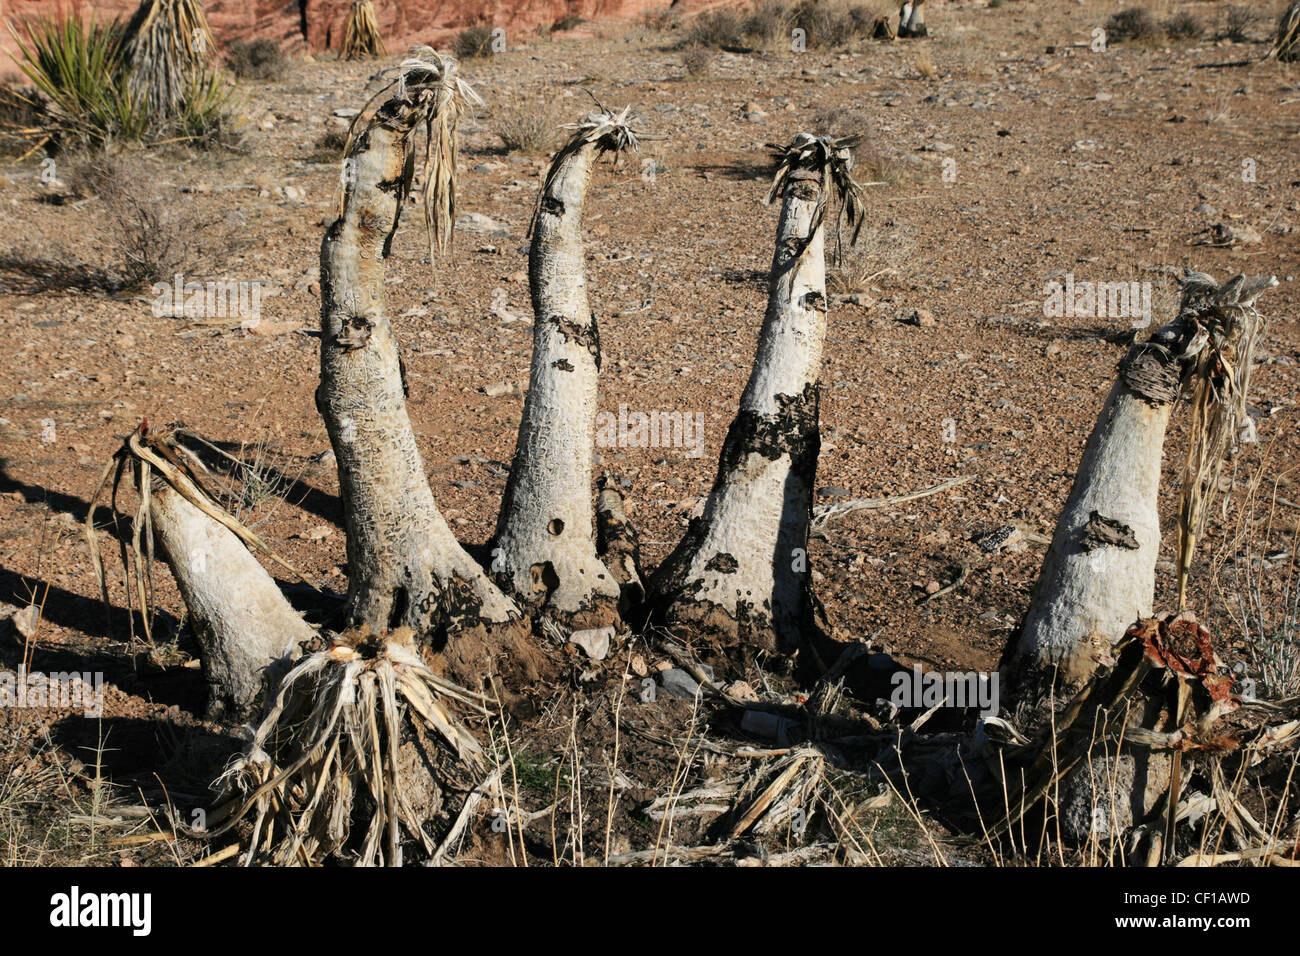 burned Banana yucca or Yucca baccata from a wildfire at Red Rocks Stock Photo